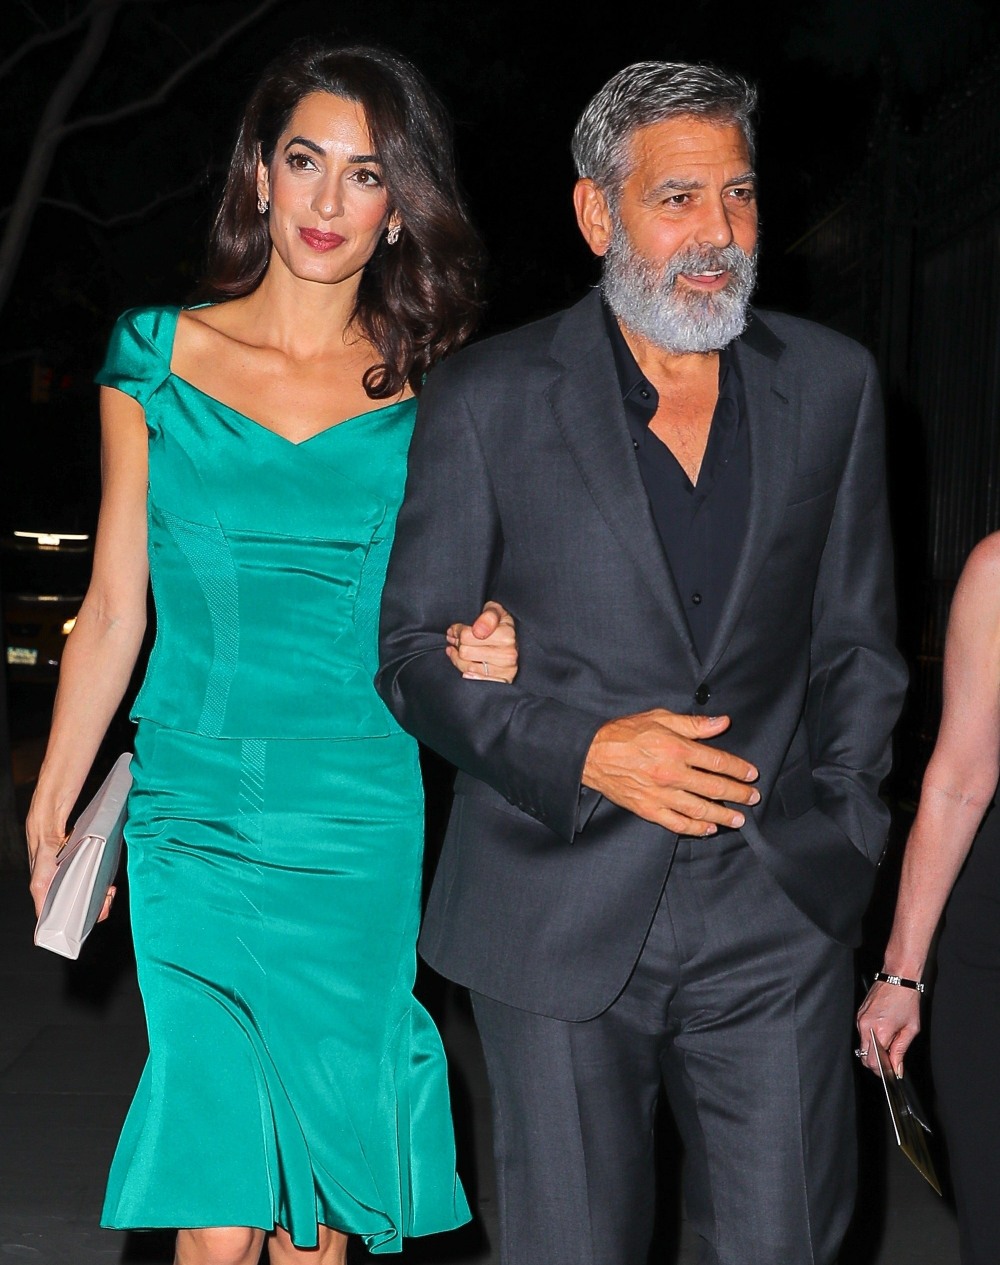 Amal Clooney and George Clooney walk arm-in-arm after a law benefit in NYC